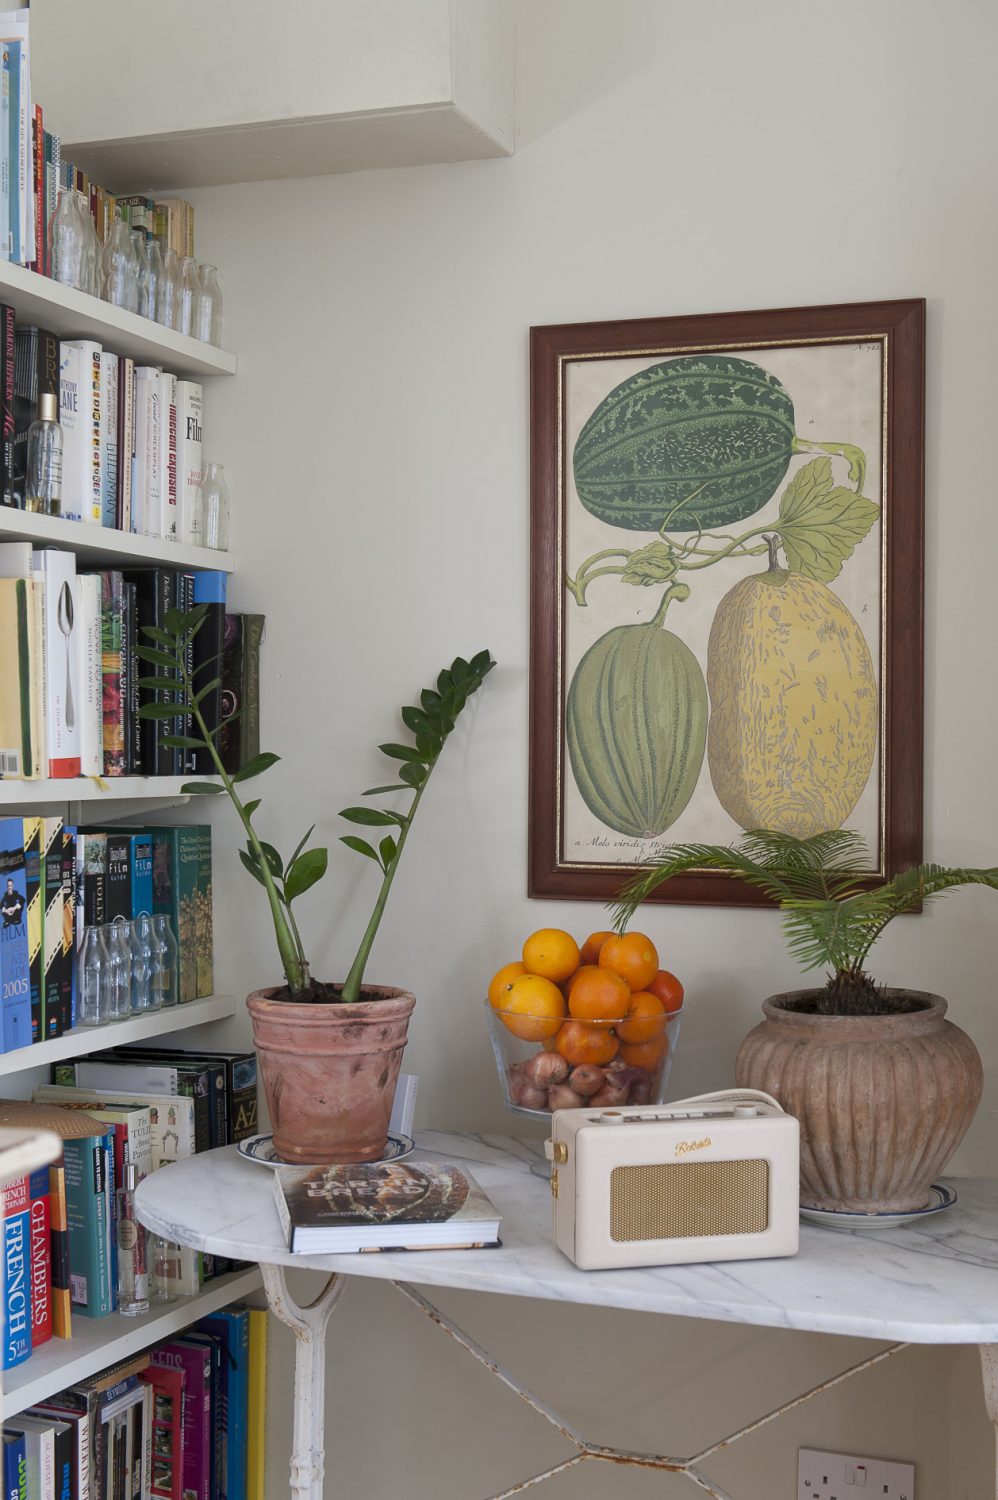 Each room includes plenty of space for books – including the kitchen. Here, recipe books sit alongside horticultural manuals and foreign dictionaries